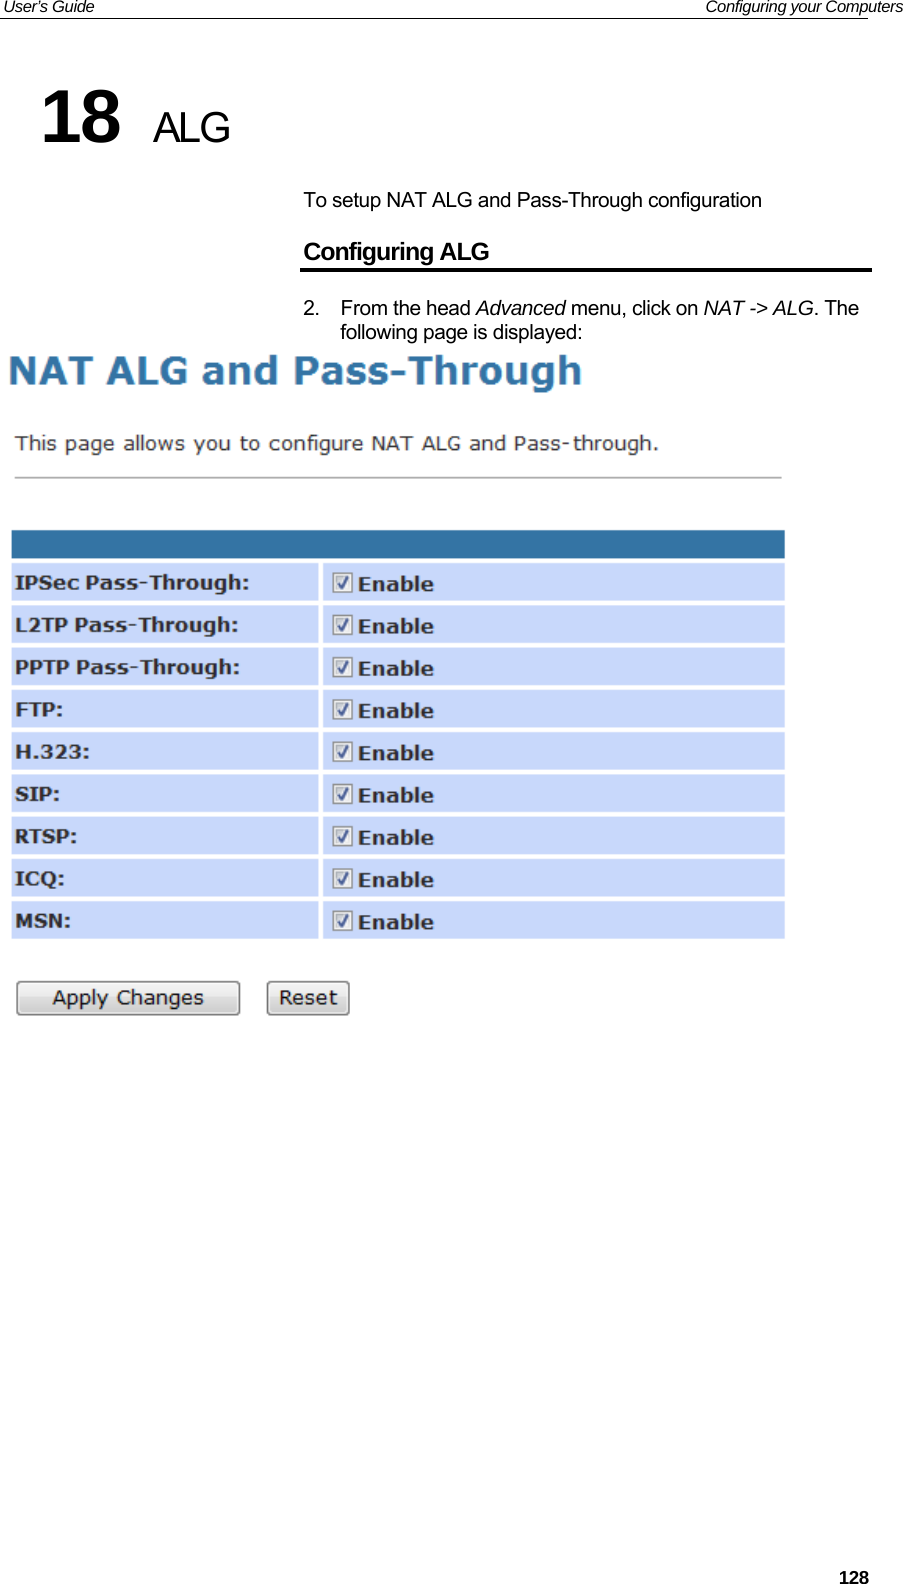 User’s Guide   Configuring your Computers 18  ALG To setup NAT ALG and Pass-Through configuration Configuring ALG 2. From the head Advanced menu, click on NAT -&gt; ALG. The following page is displayed:                128